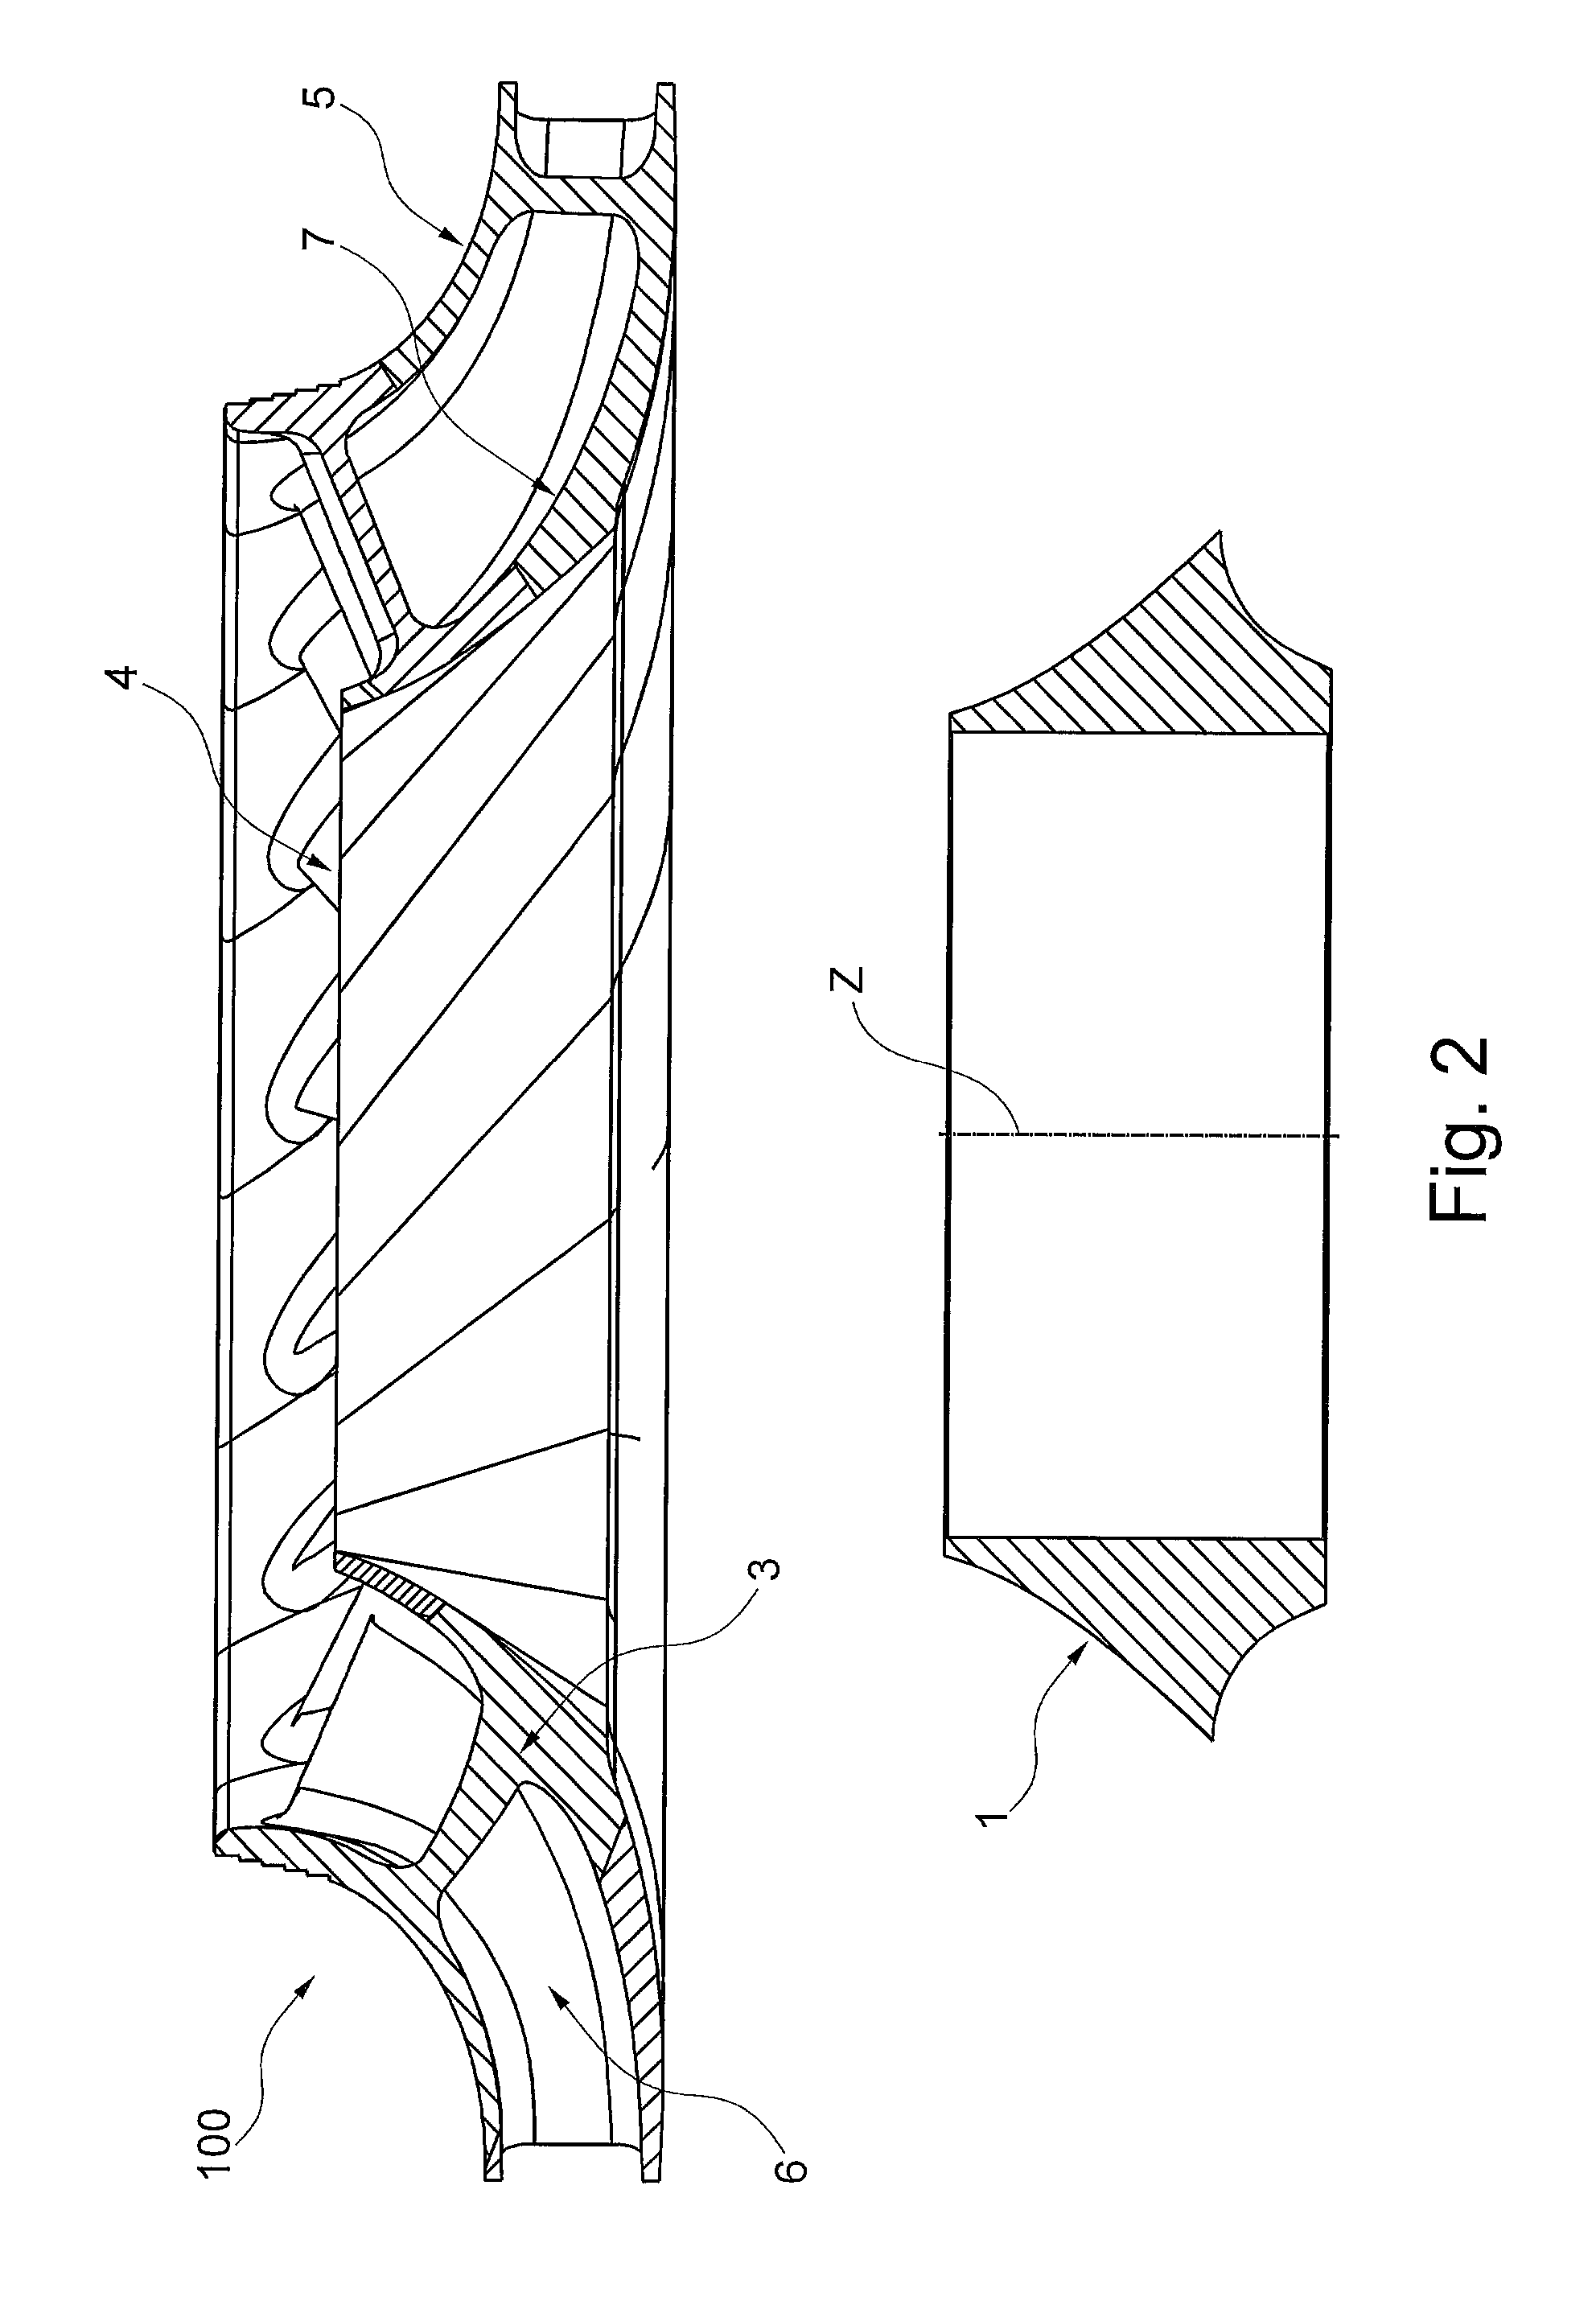 Method for making an impeller from sector segments